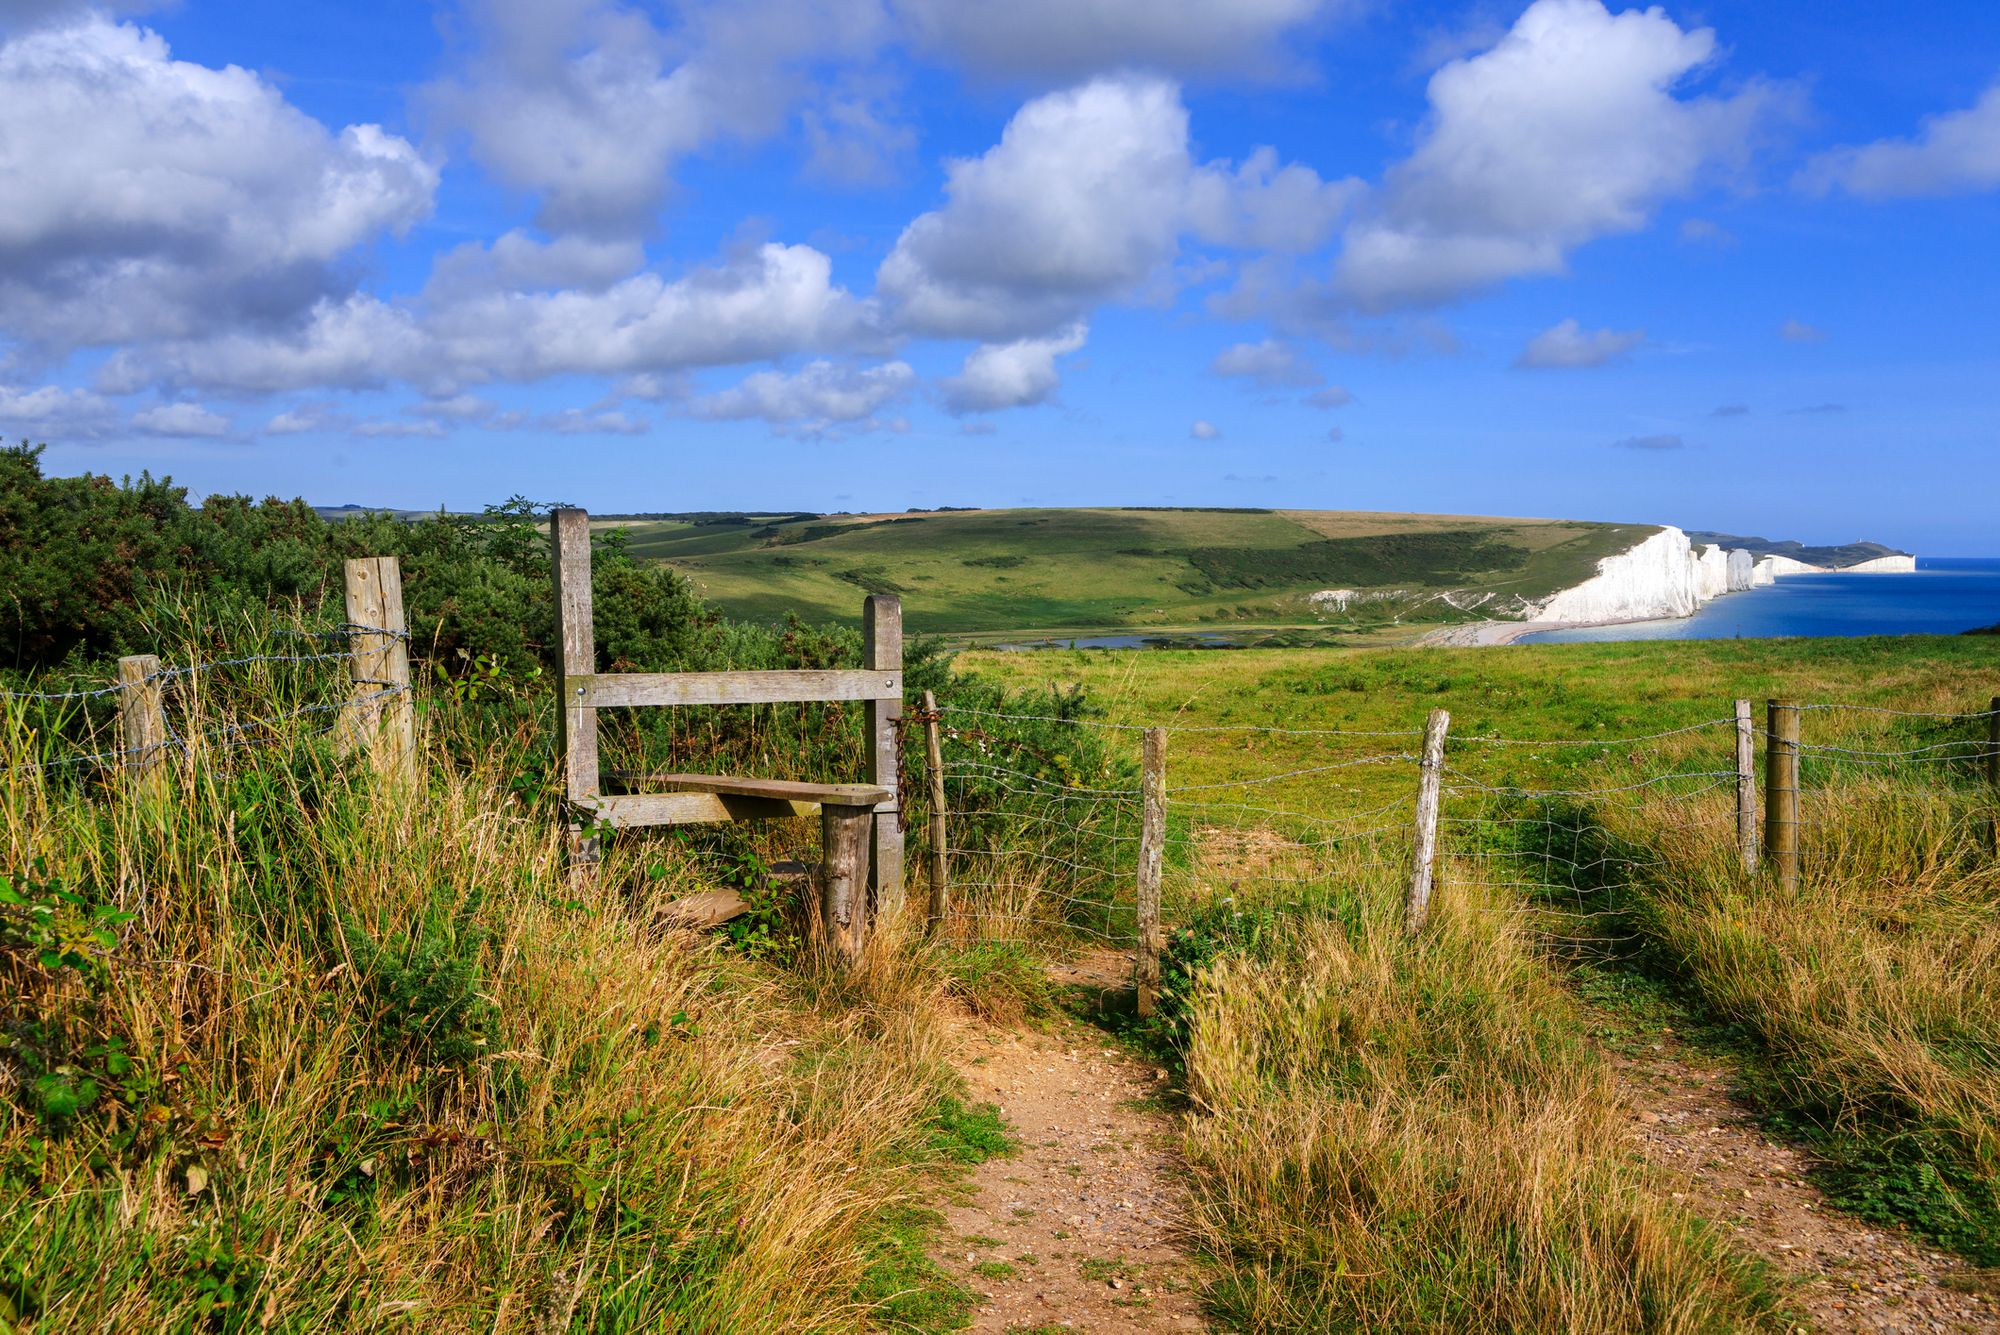 The South Downs Way, just coming into Cuckmere Haven. This is one of the best hikes in the UK.